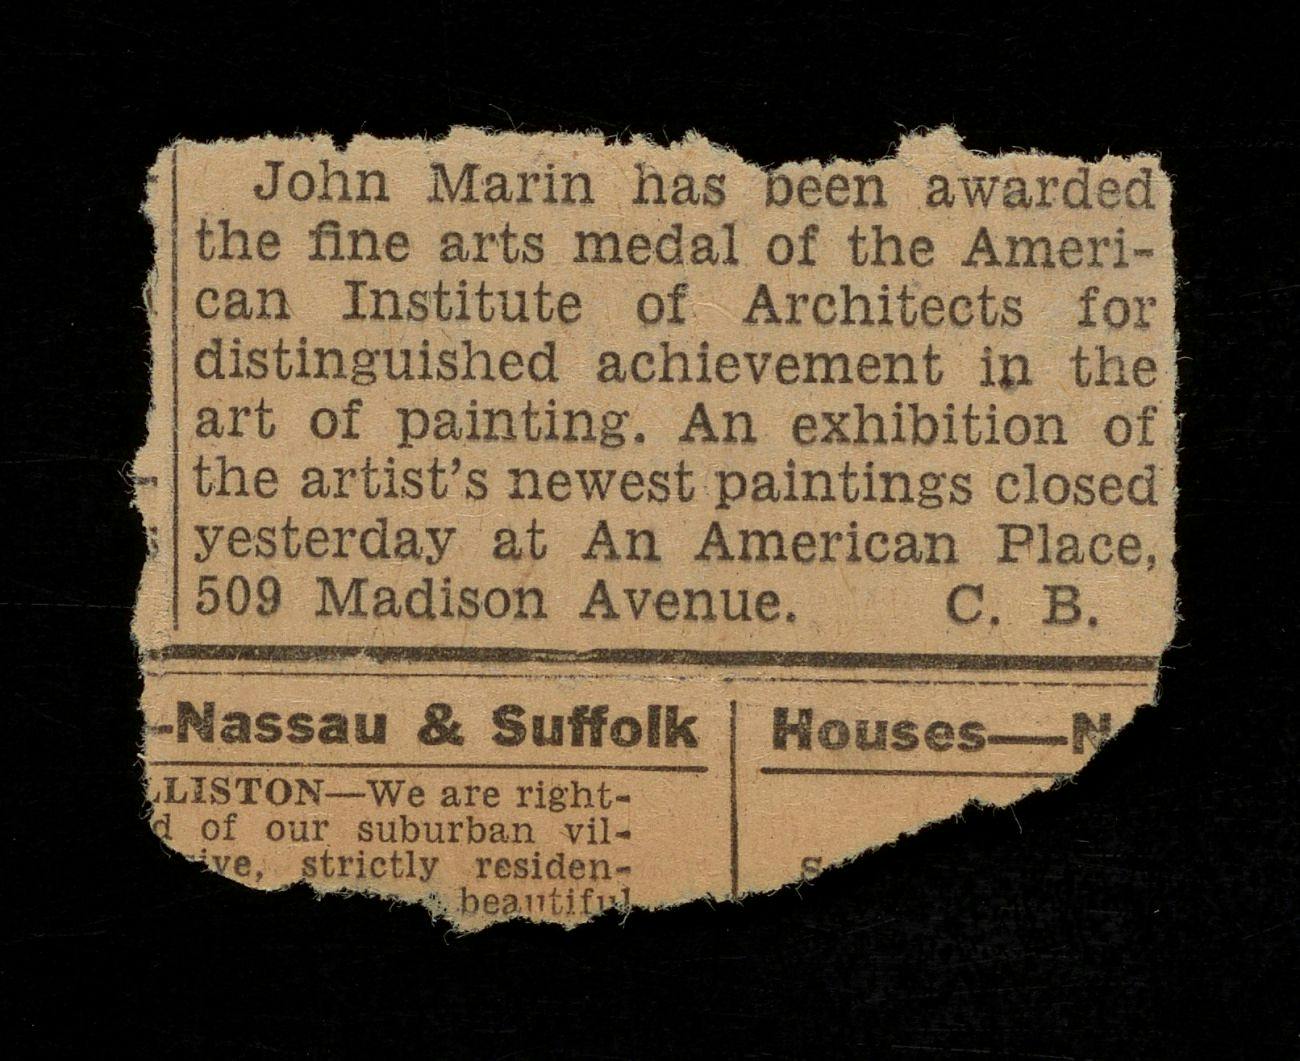 Newspaper clipping from the Emily Hall Tremaine Papers